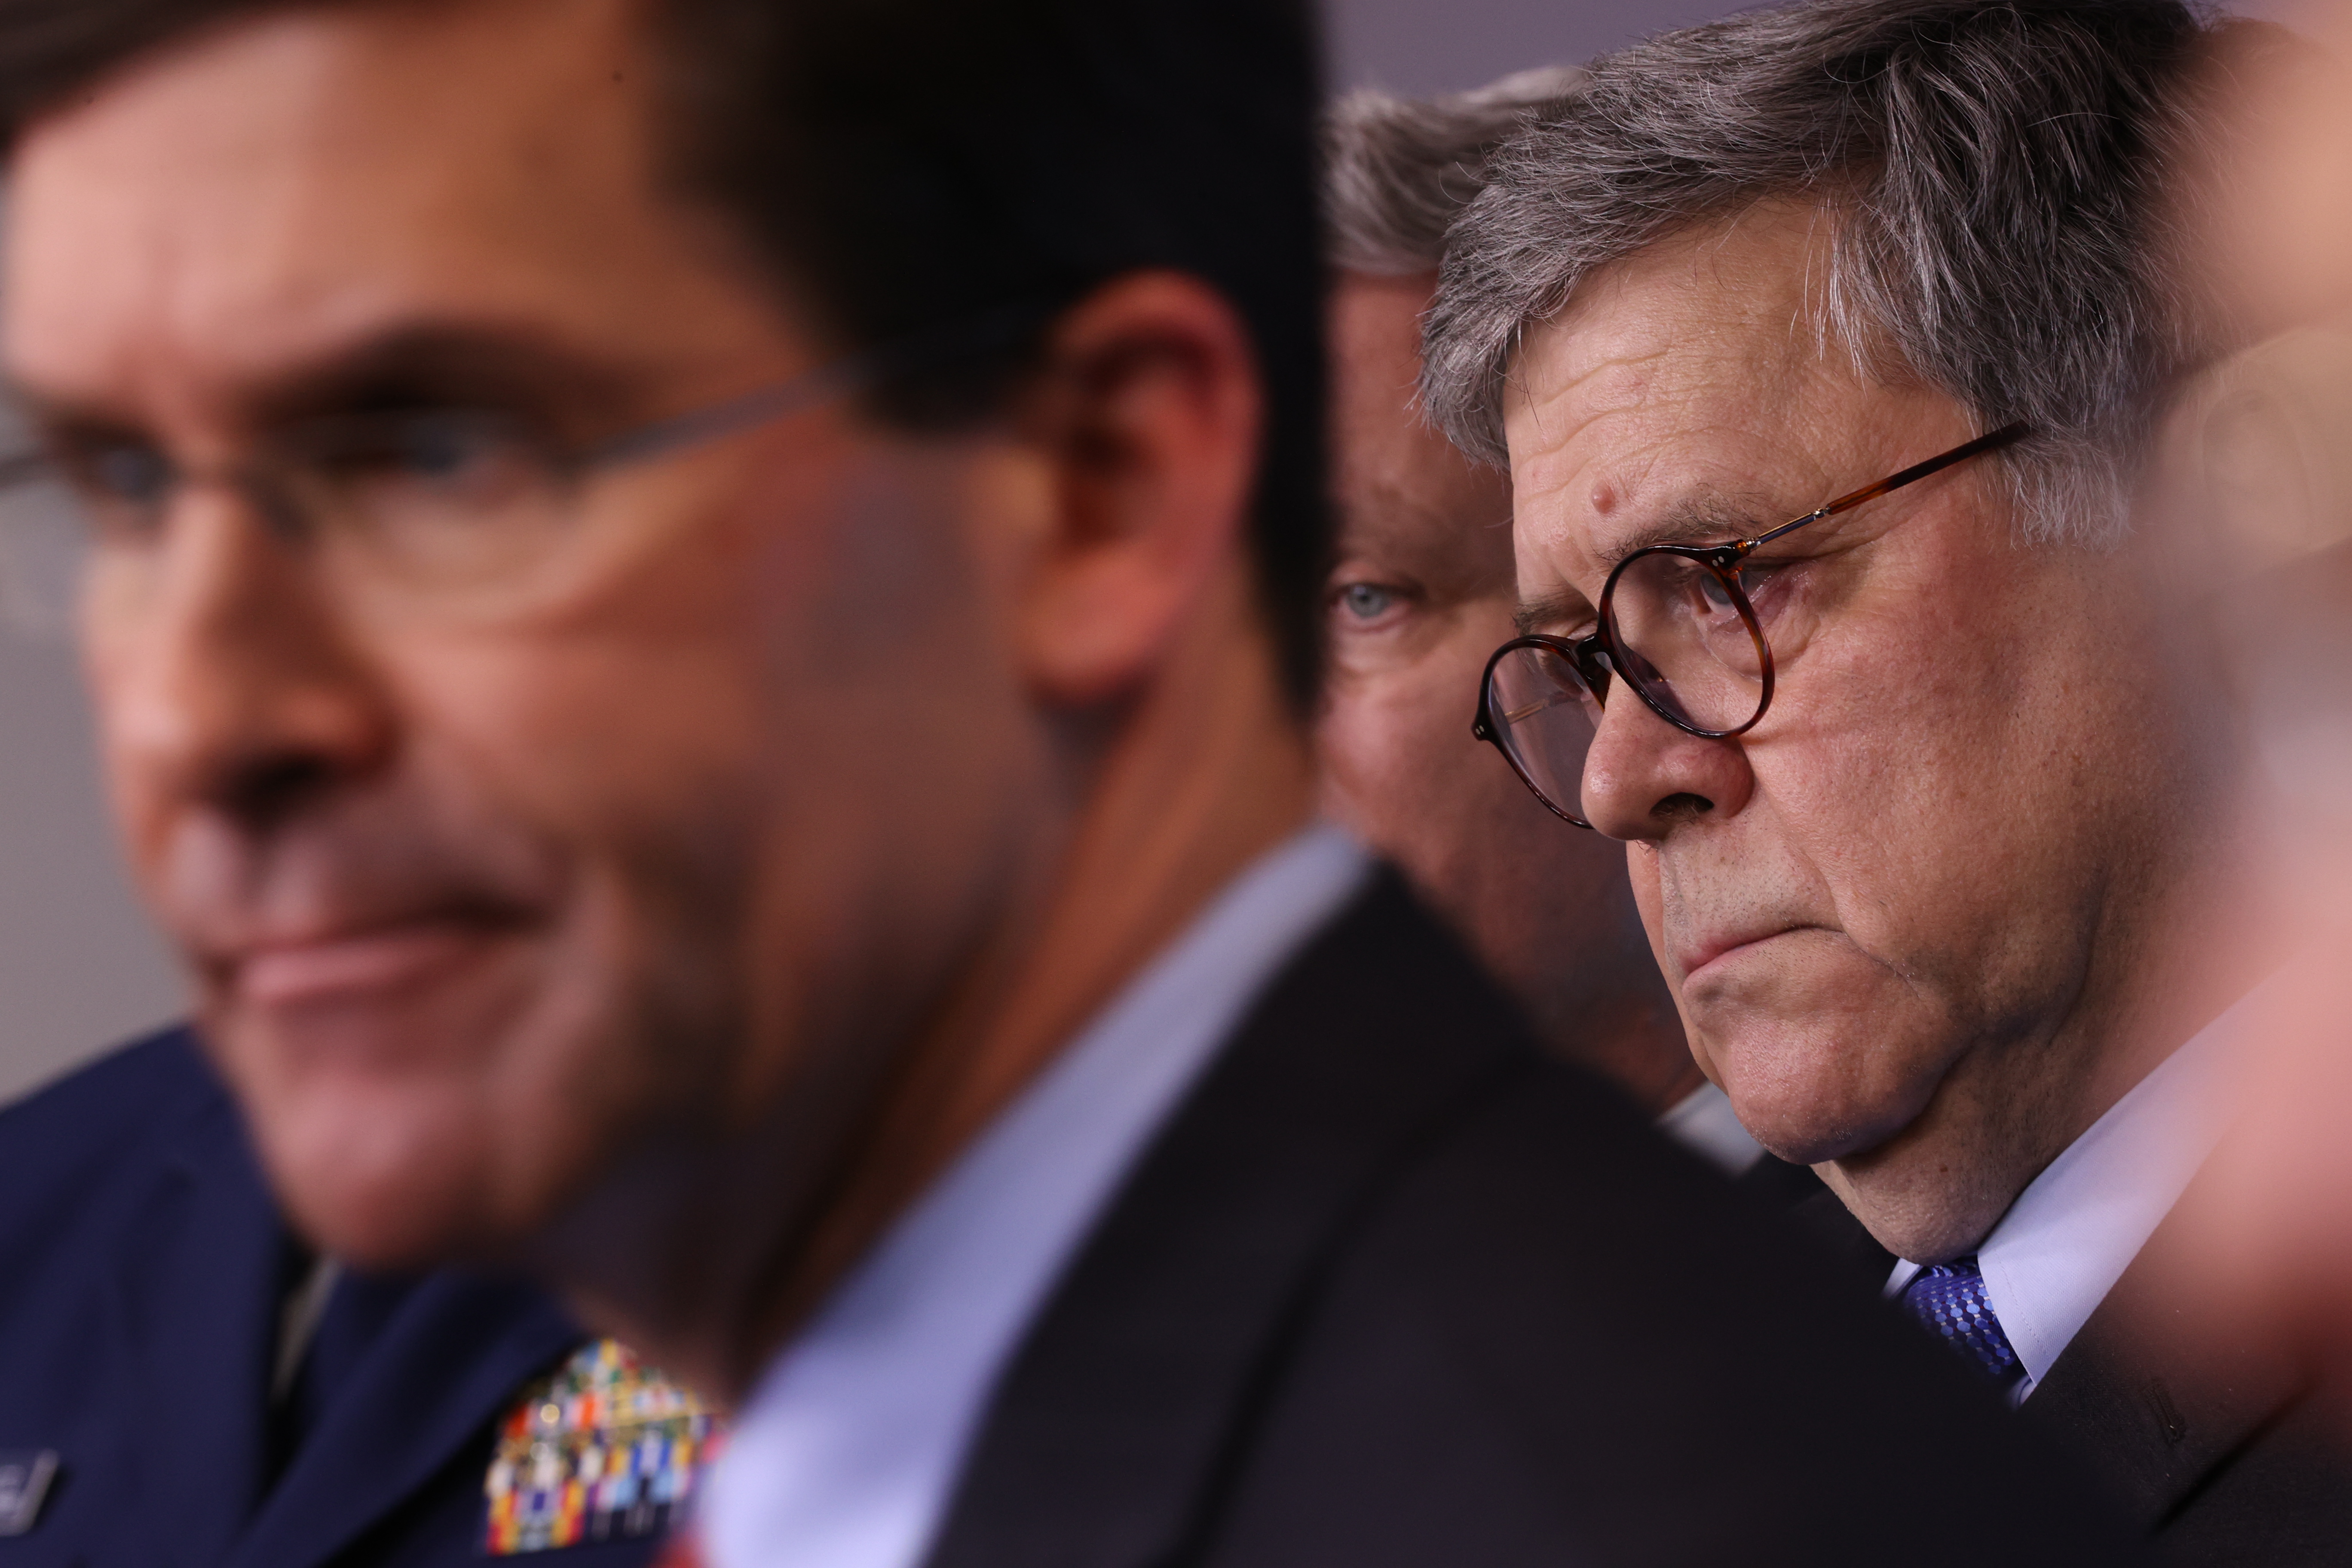 Attorney General William Barr (R) participates in the daily White House Coronavirus press briefing April 1, 2020 in Washington, DC. (Photo by Win McNamee/Getty Images)